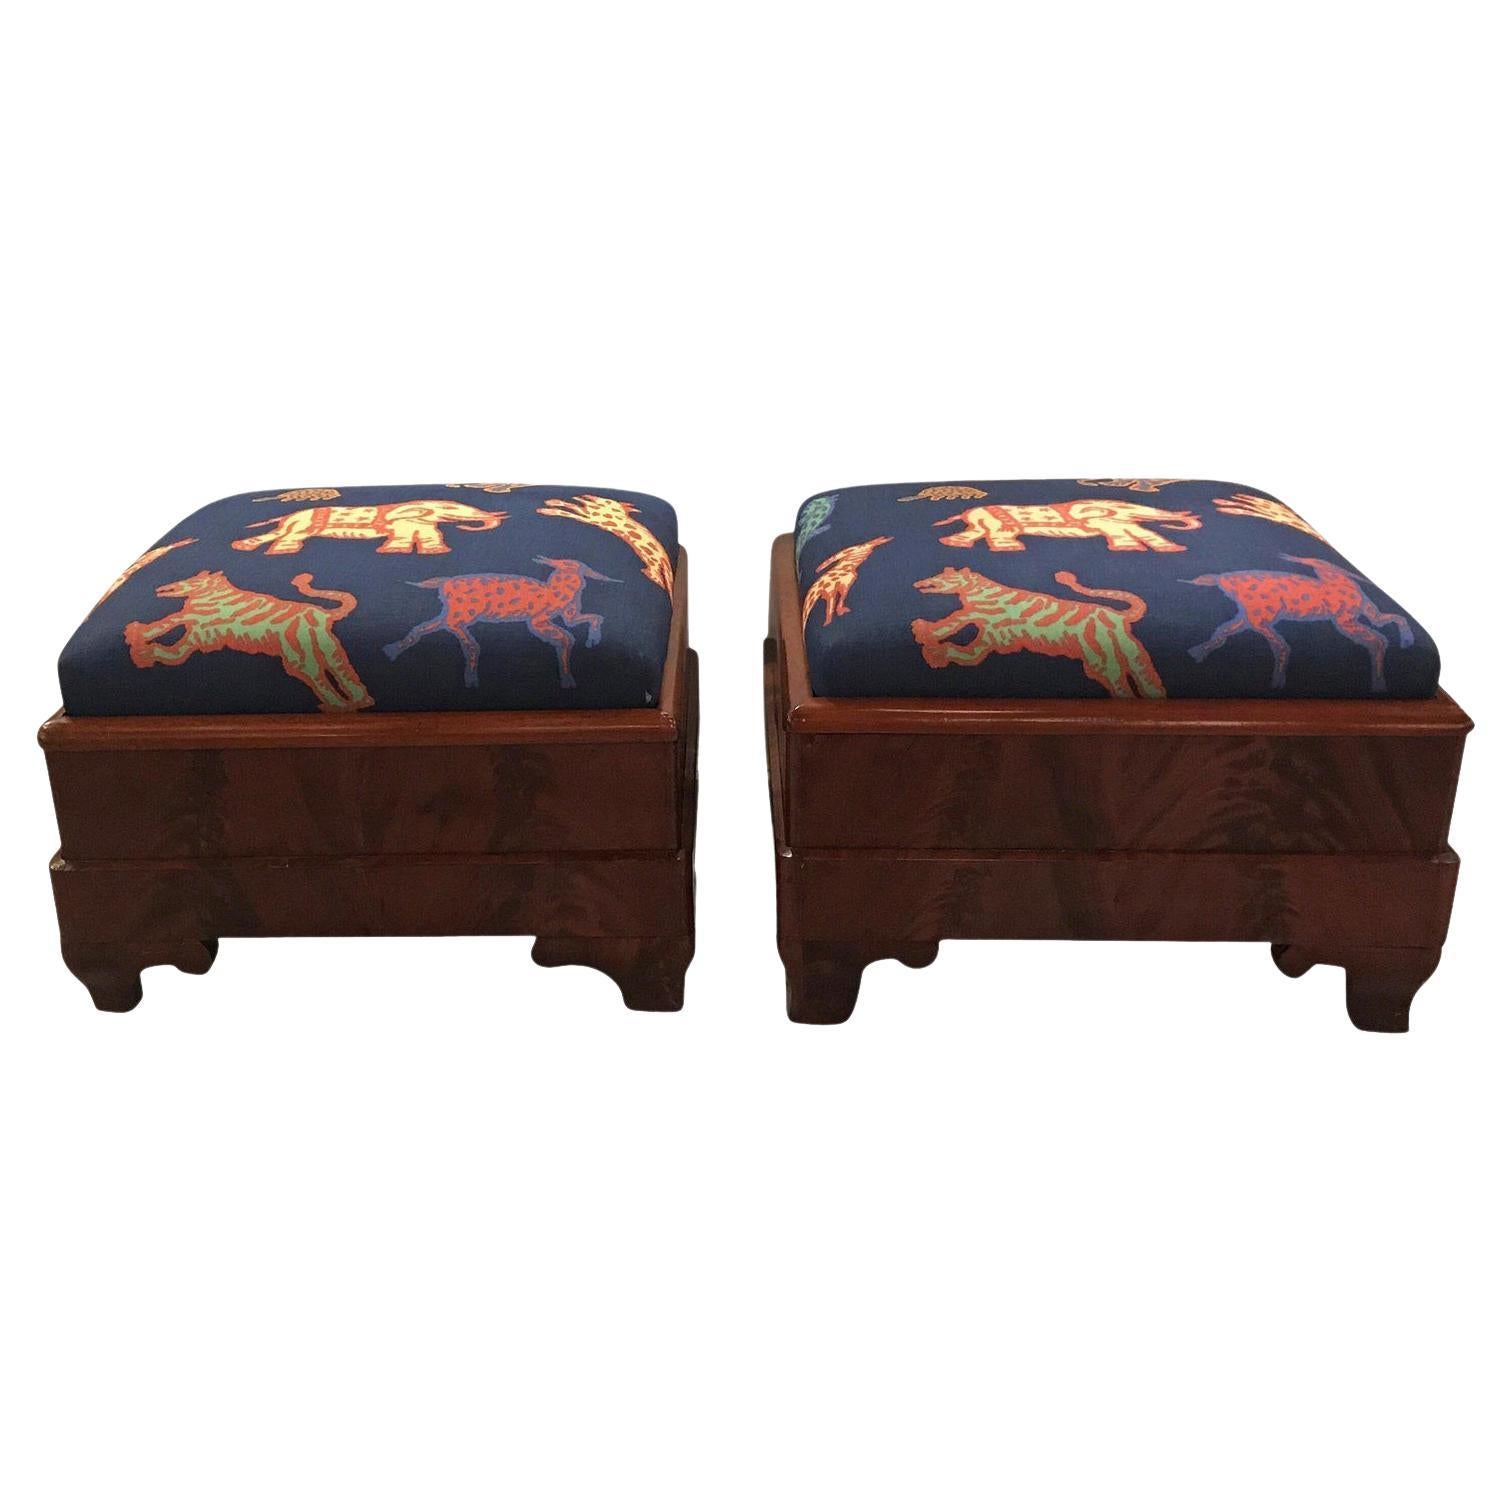 Pair of 19th Century Flame Mahogany American Empire Benches